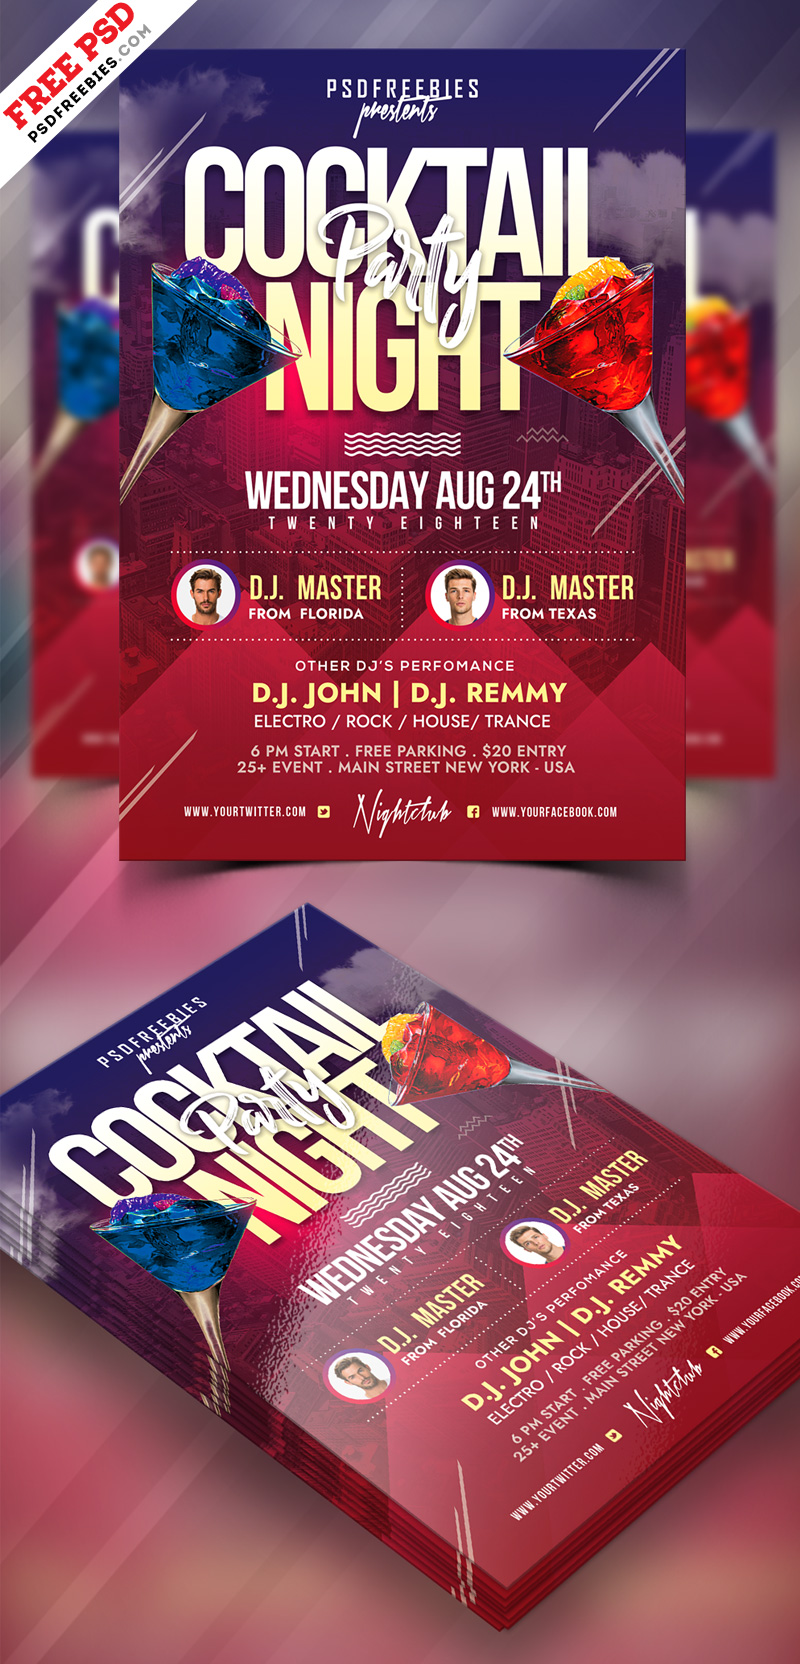 Cocktail-Party-Flyer-PSD-Free-Download2